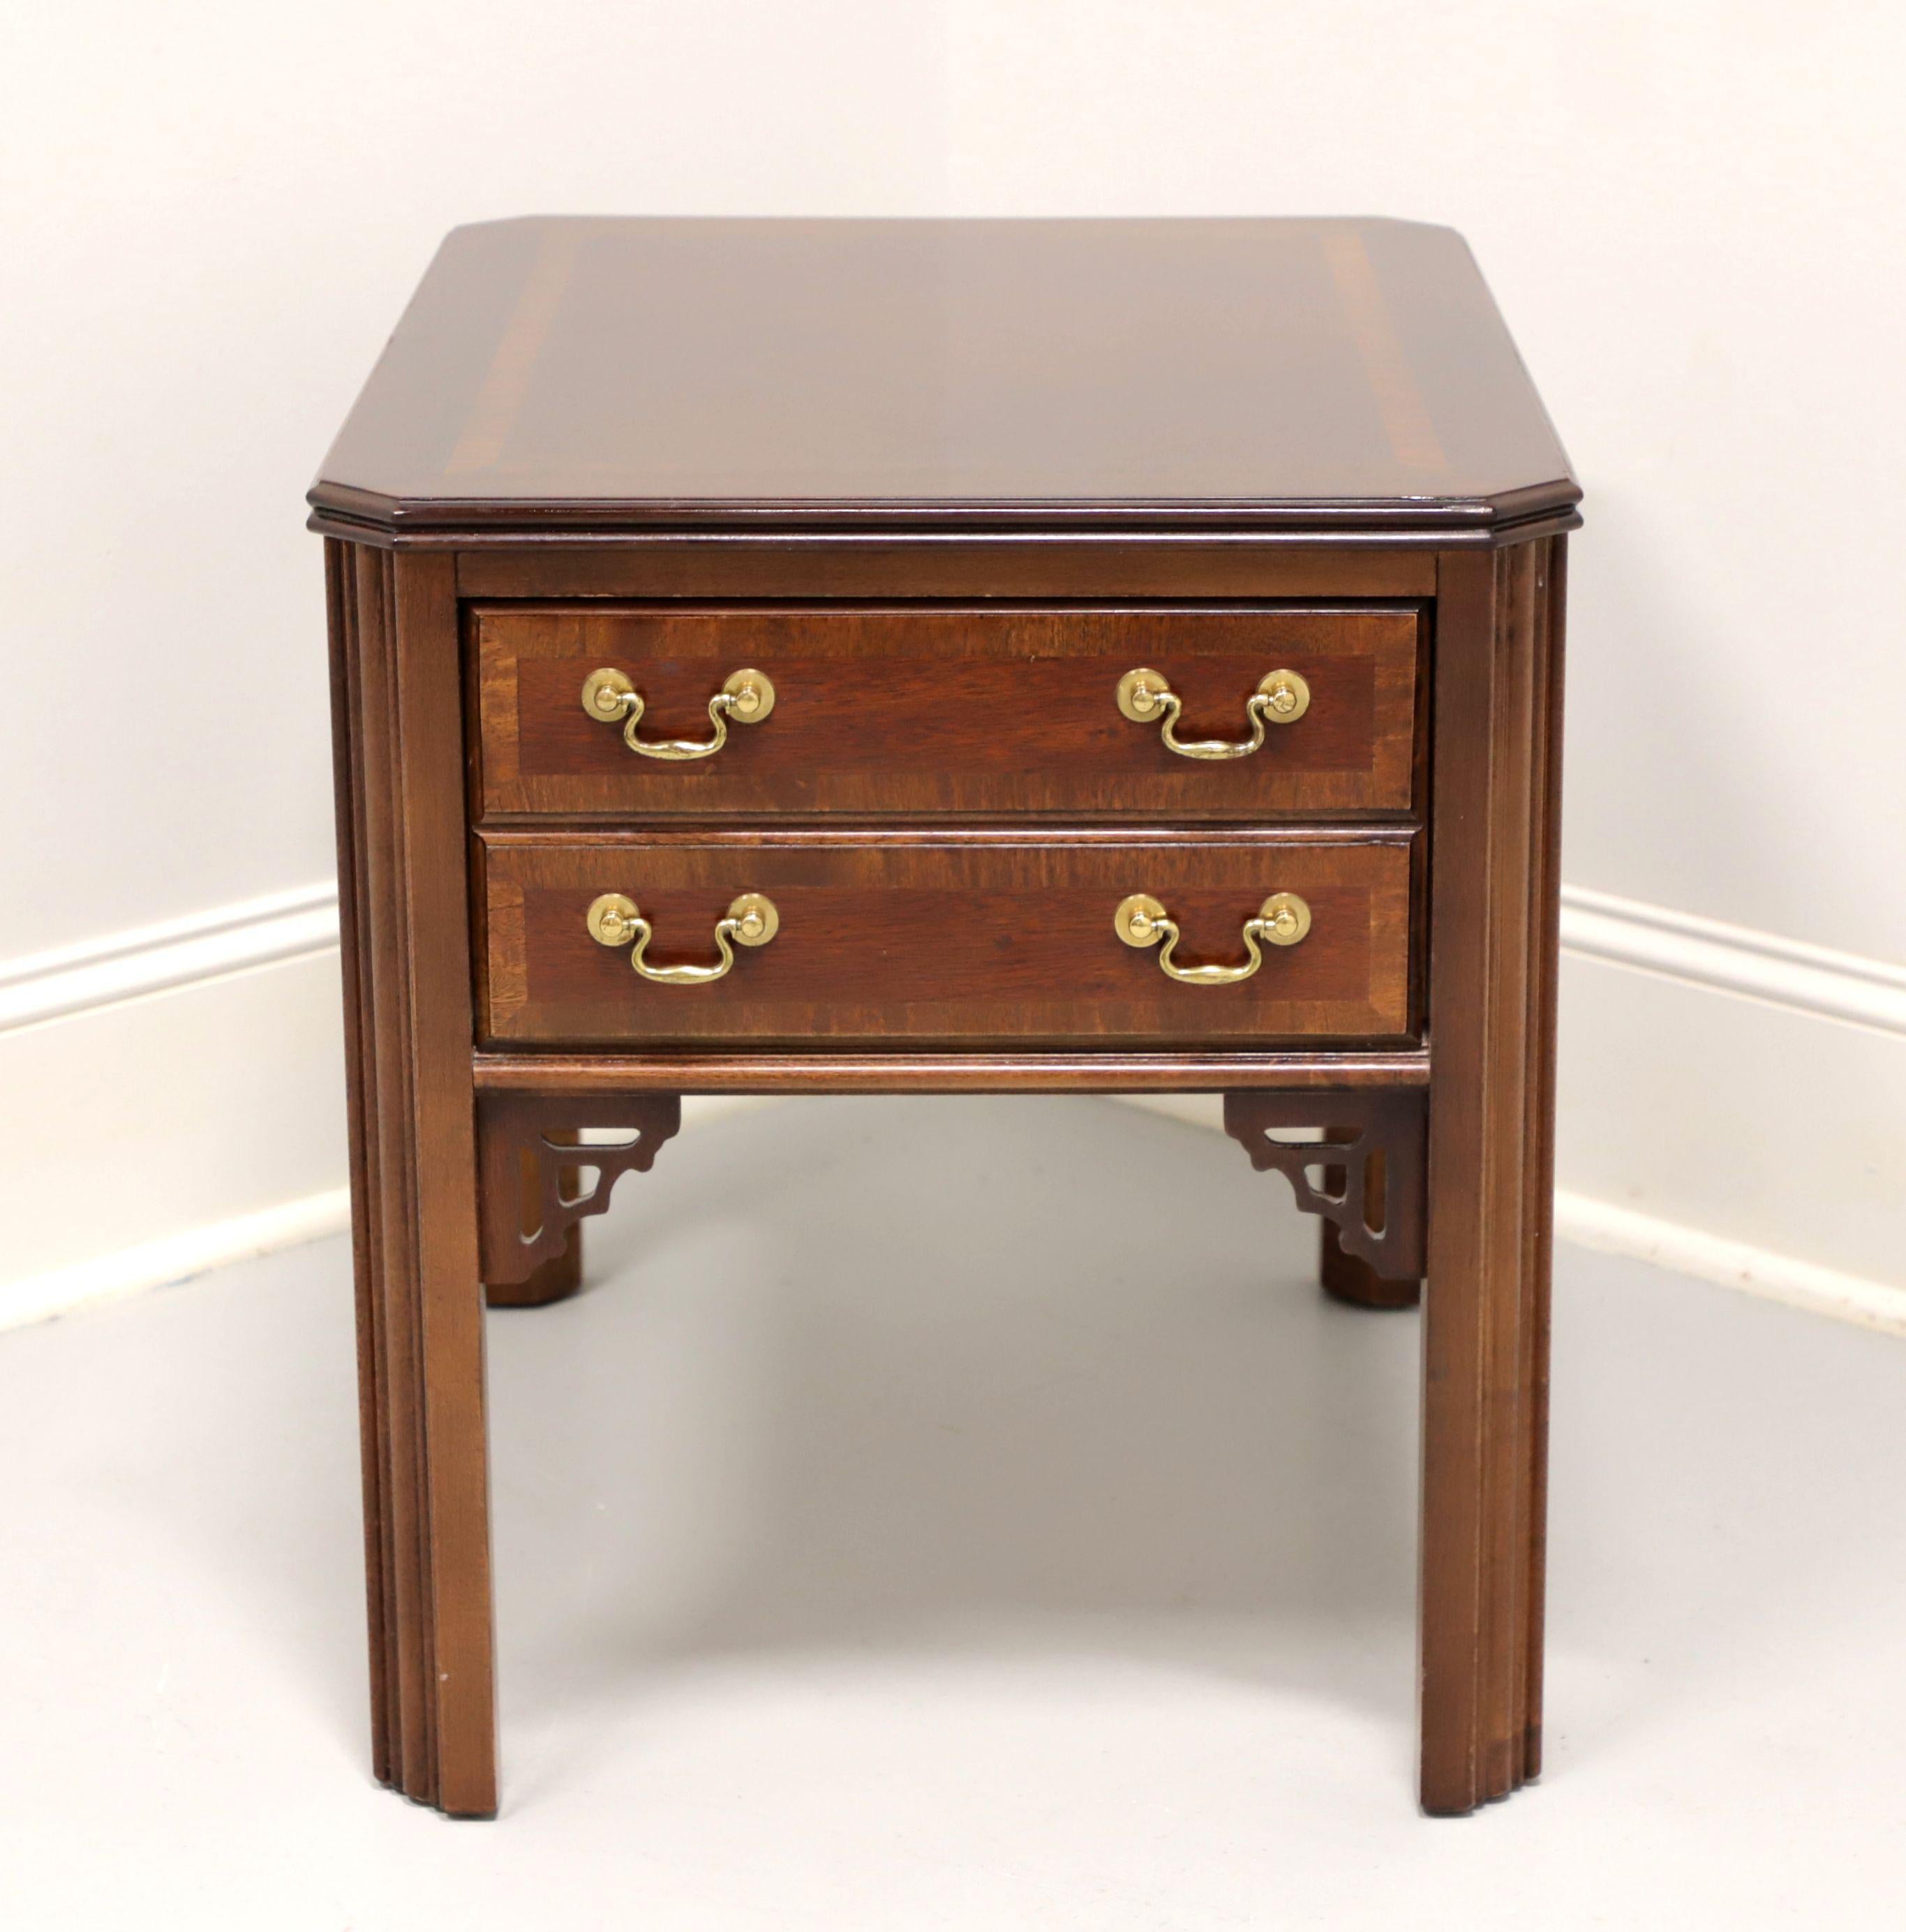 A Chippendale style side table by Lane Furniture. Mahogany with inlaid & banded top, brass hardware, banded drawer fronts, fretwork accents to corner joints, and fluted straight legs. Features one drawer of dovetail construction. Made in Altavista,